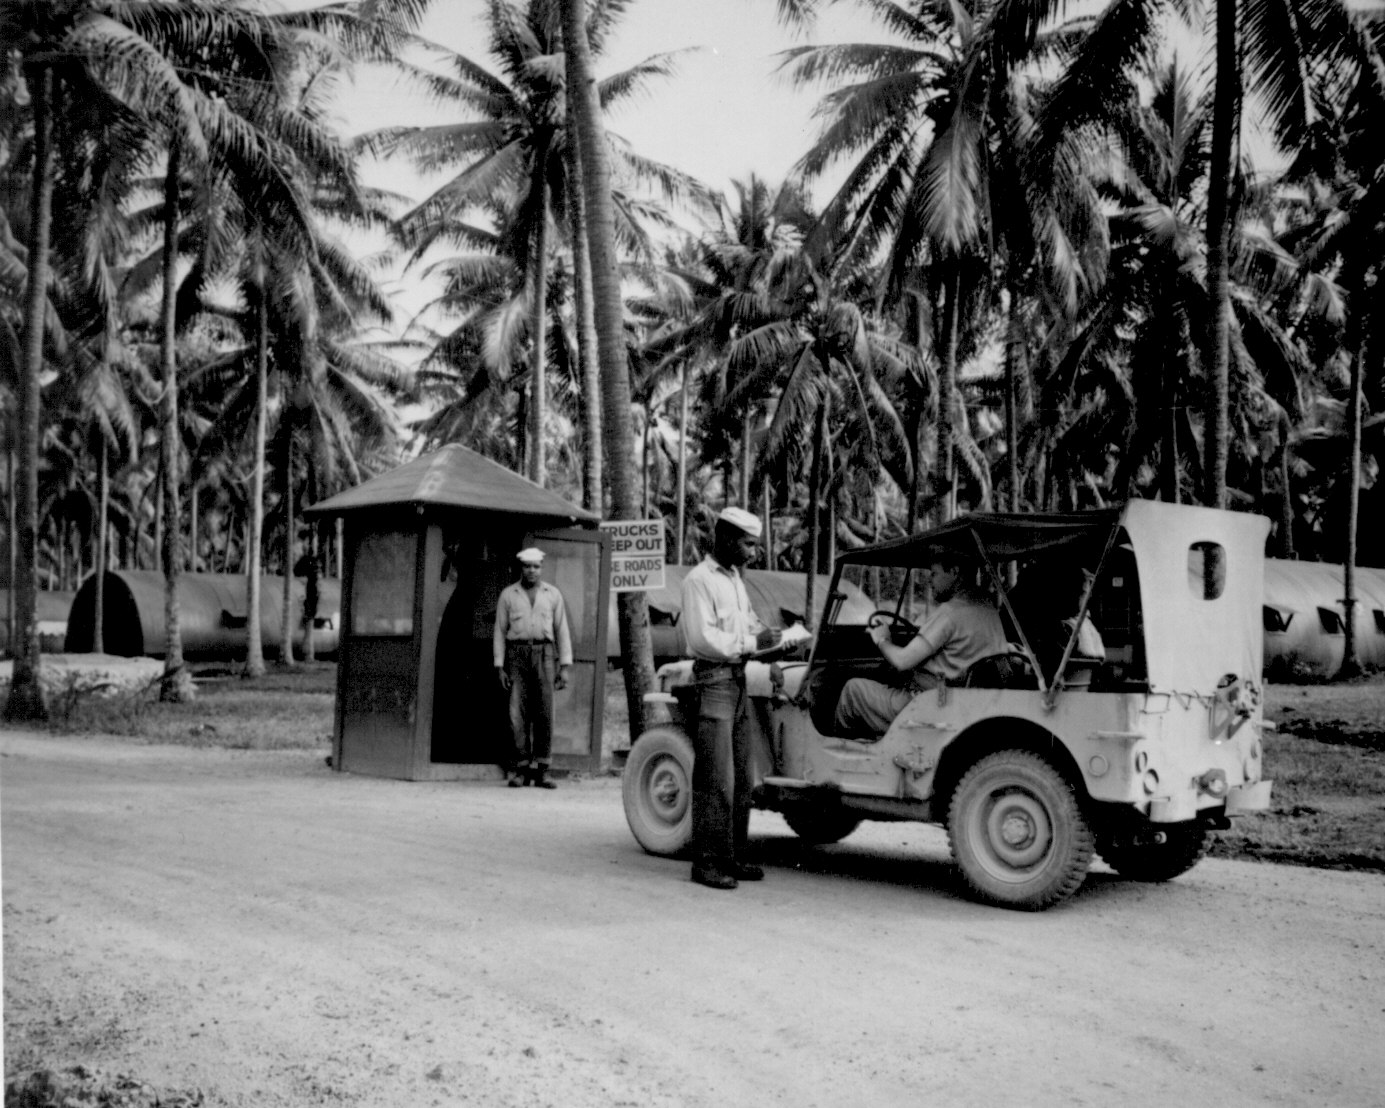 African-American guards Seamen 1st Class Dook Bland and Taft Gray guarding the entrance to the US Navy base at Espiritu Santo, New Hebrides, date unknown